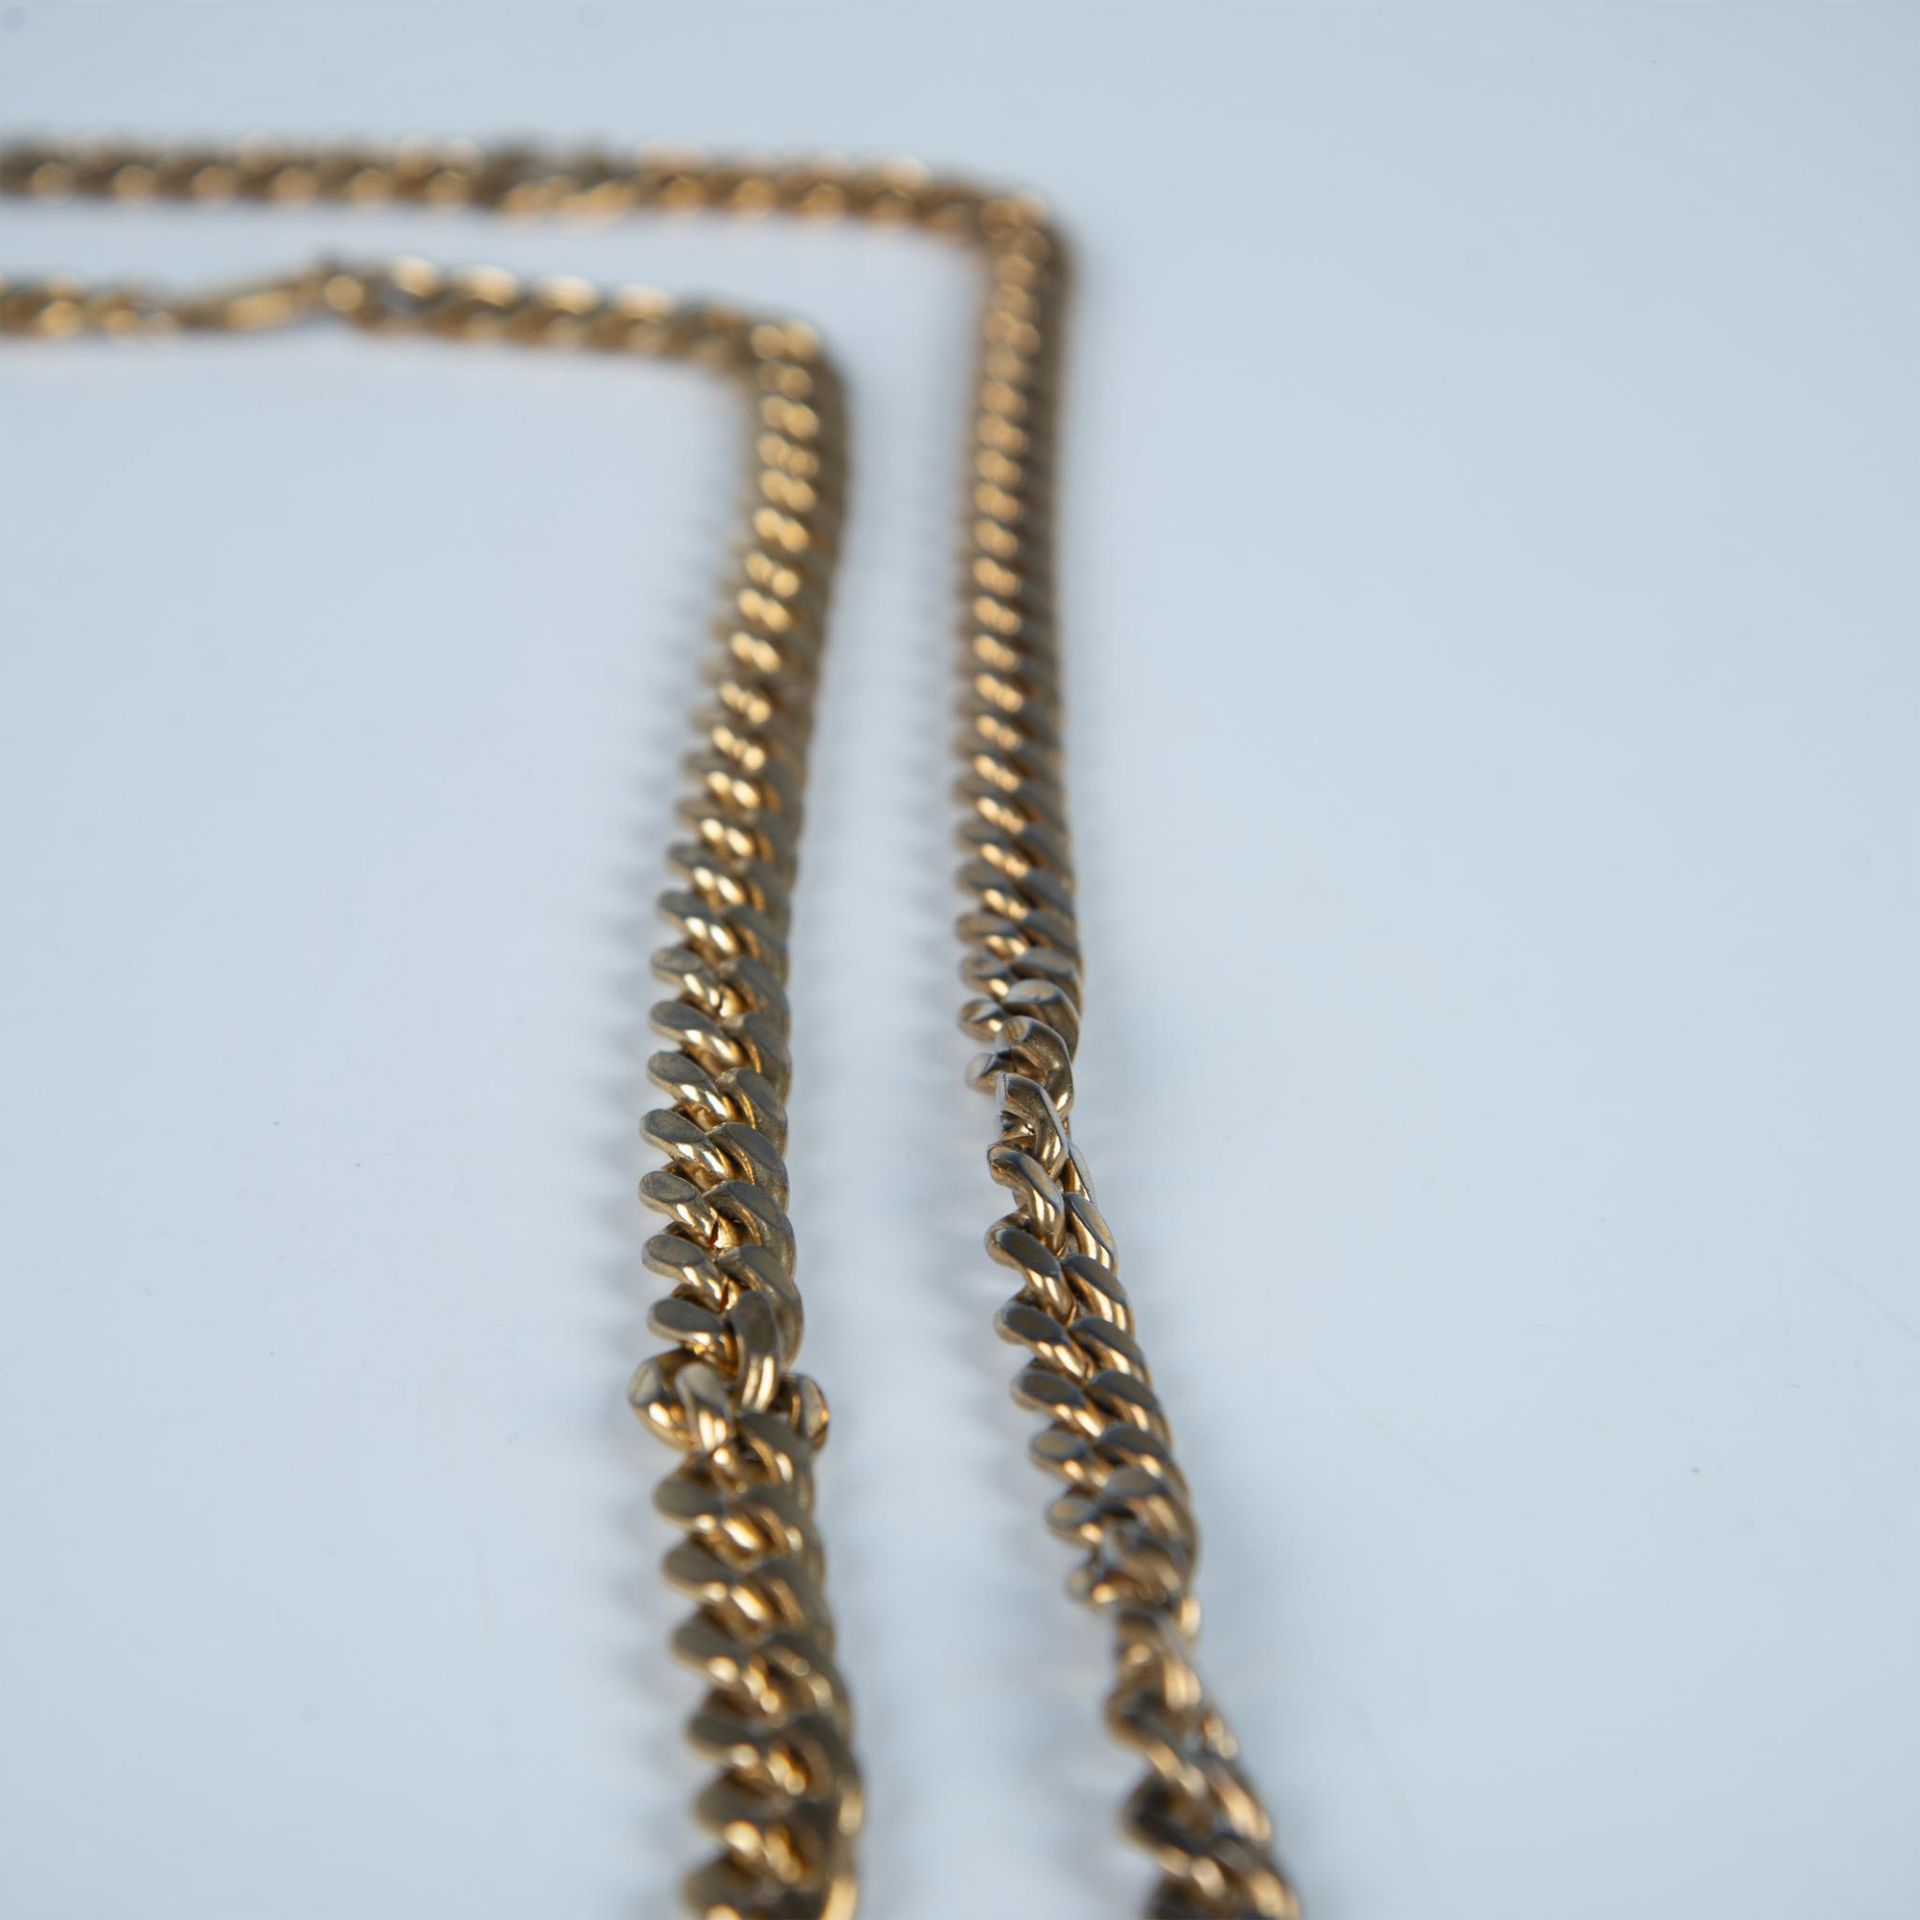 2pc Heavy Gold Metal Necklace Chains - Image 2 of 4